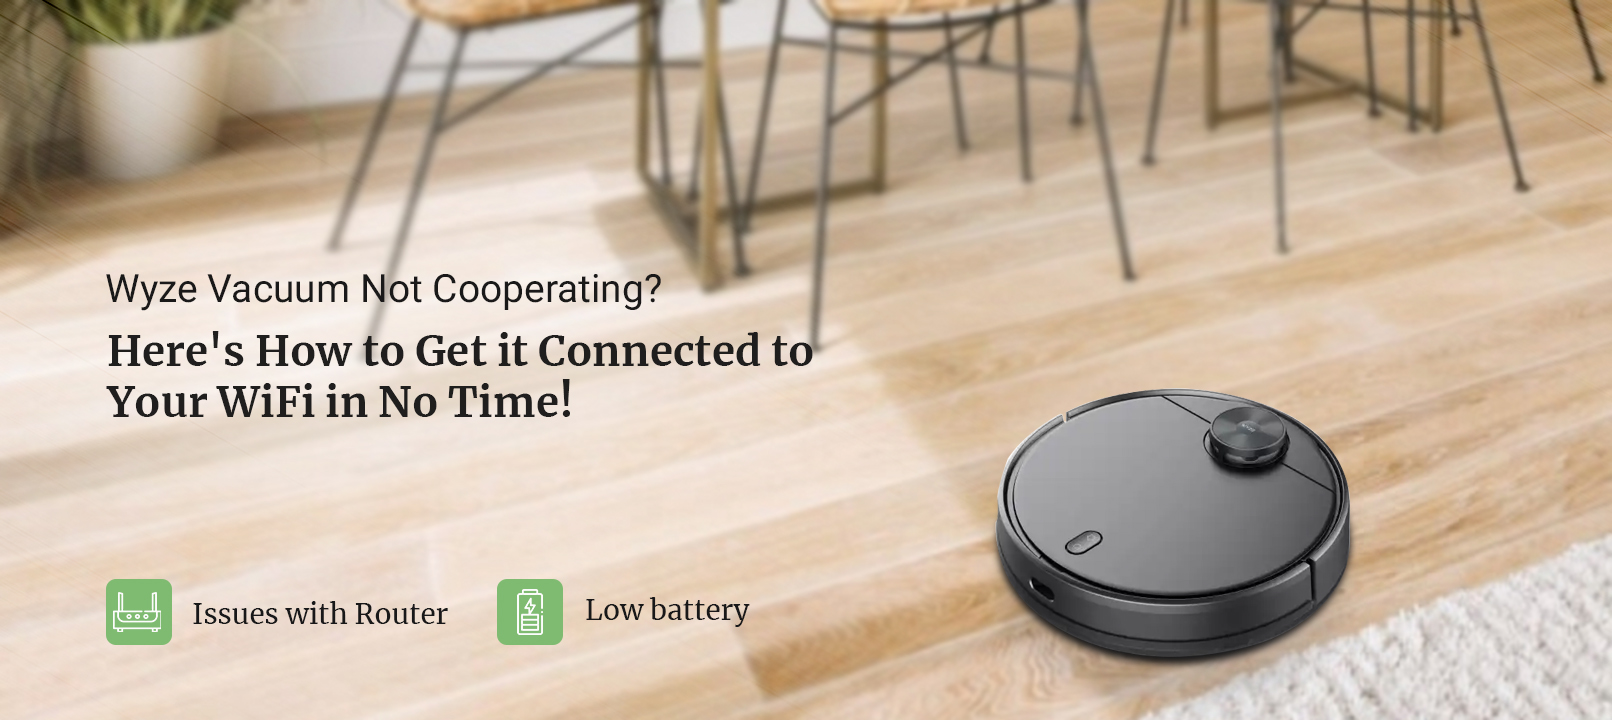 Why is the Wyze Vacuum Not Connecting to WiFi